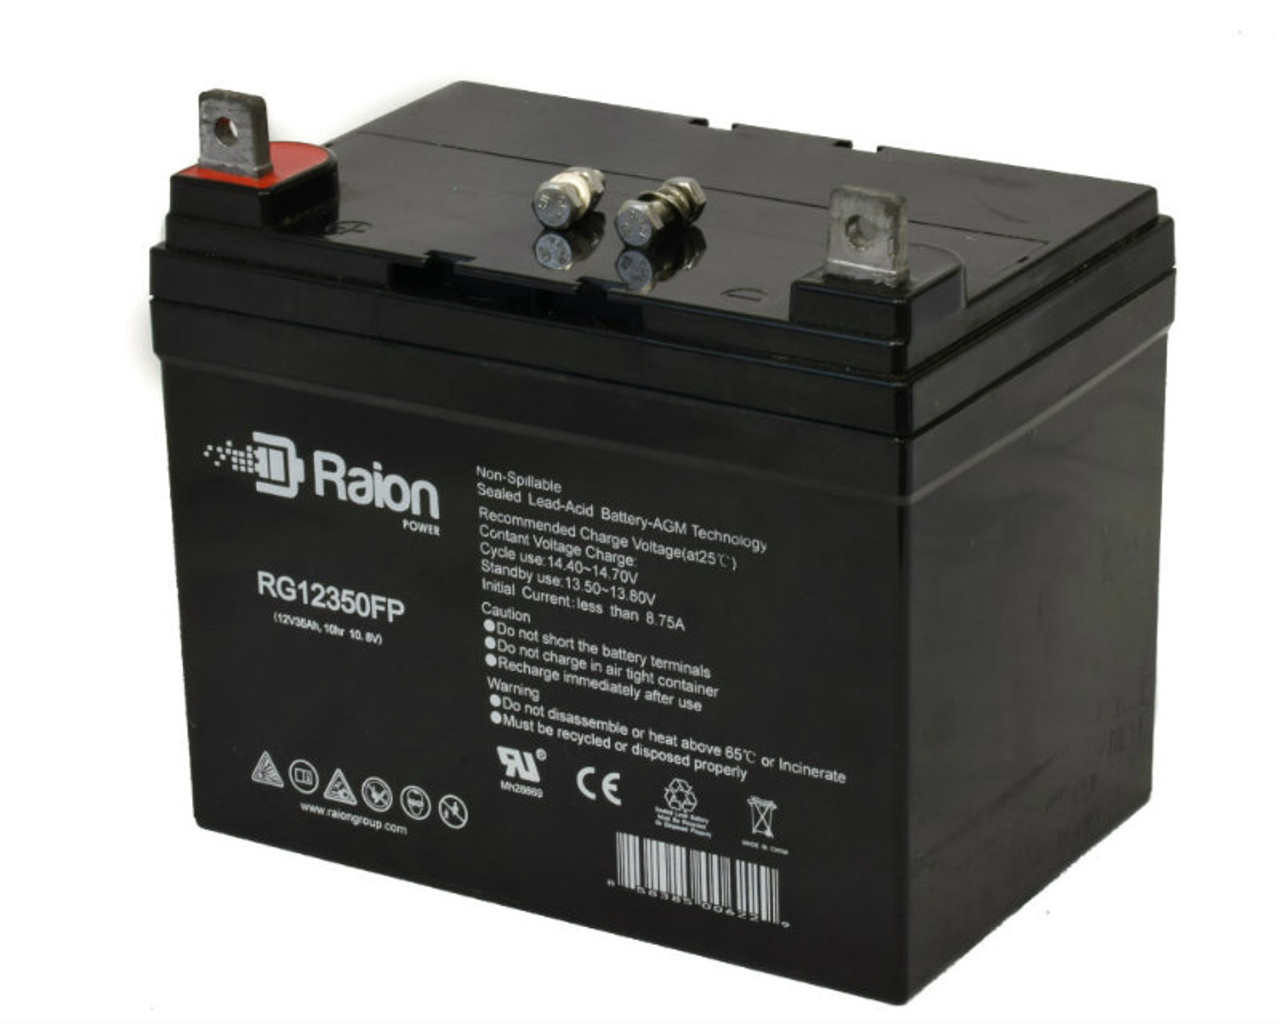 Raion Power Replacement 12V 35Ah Battery for Speedex Tractor S-17 - 1 Pack